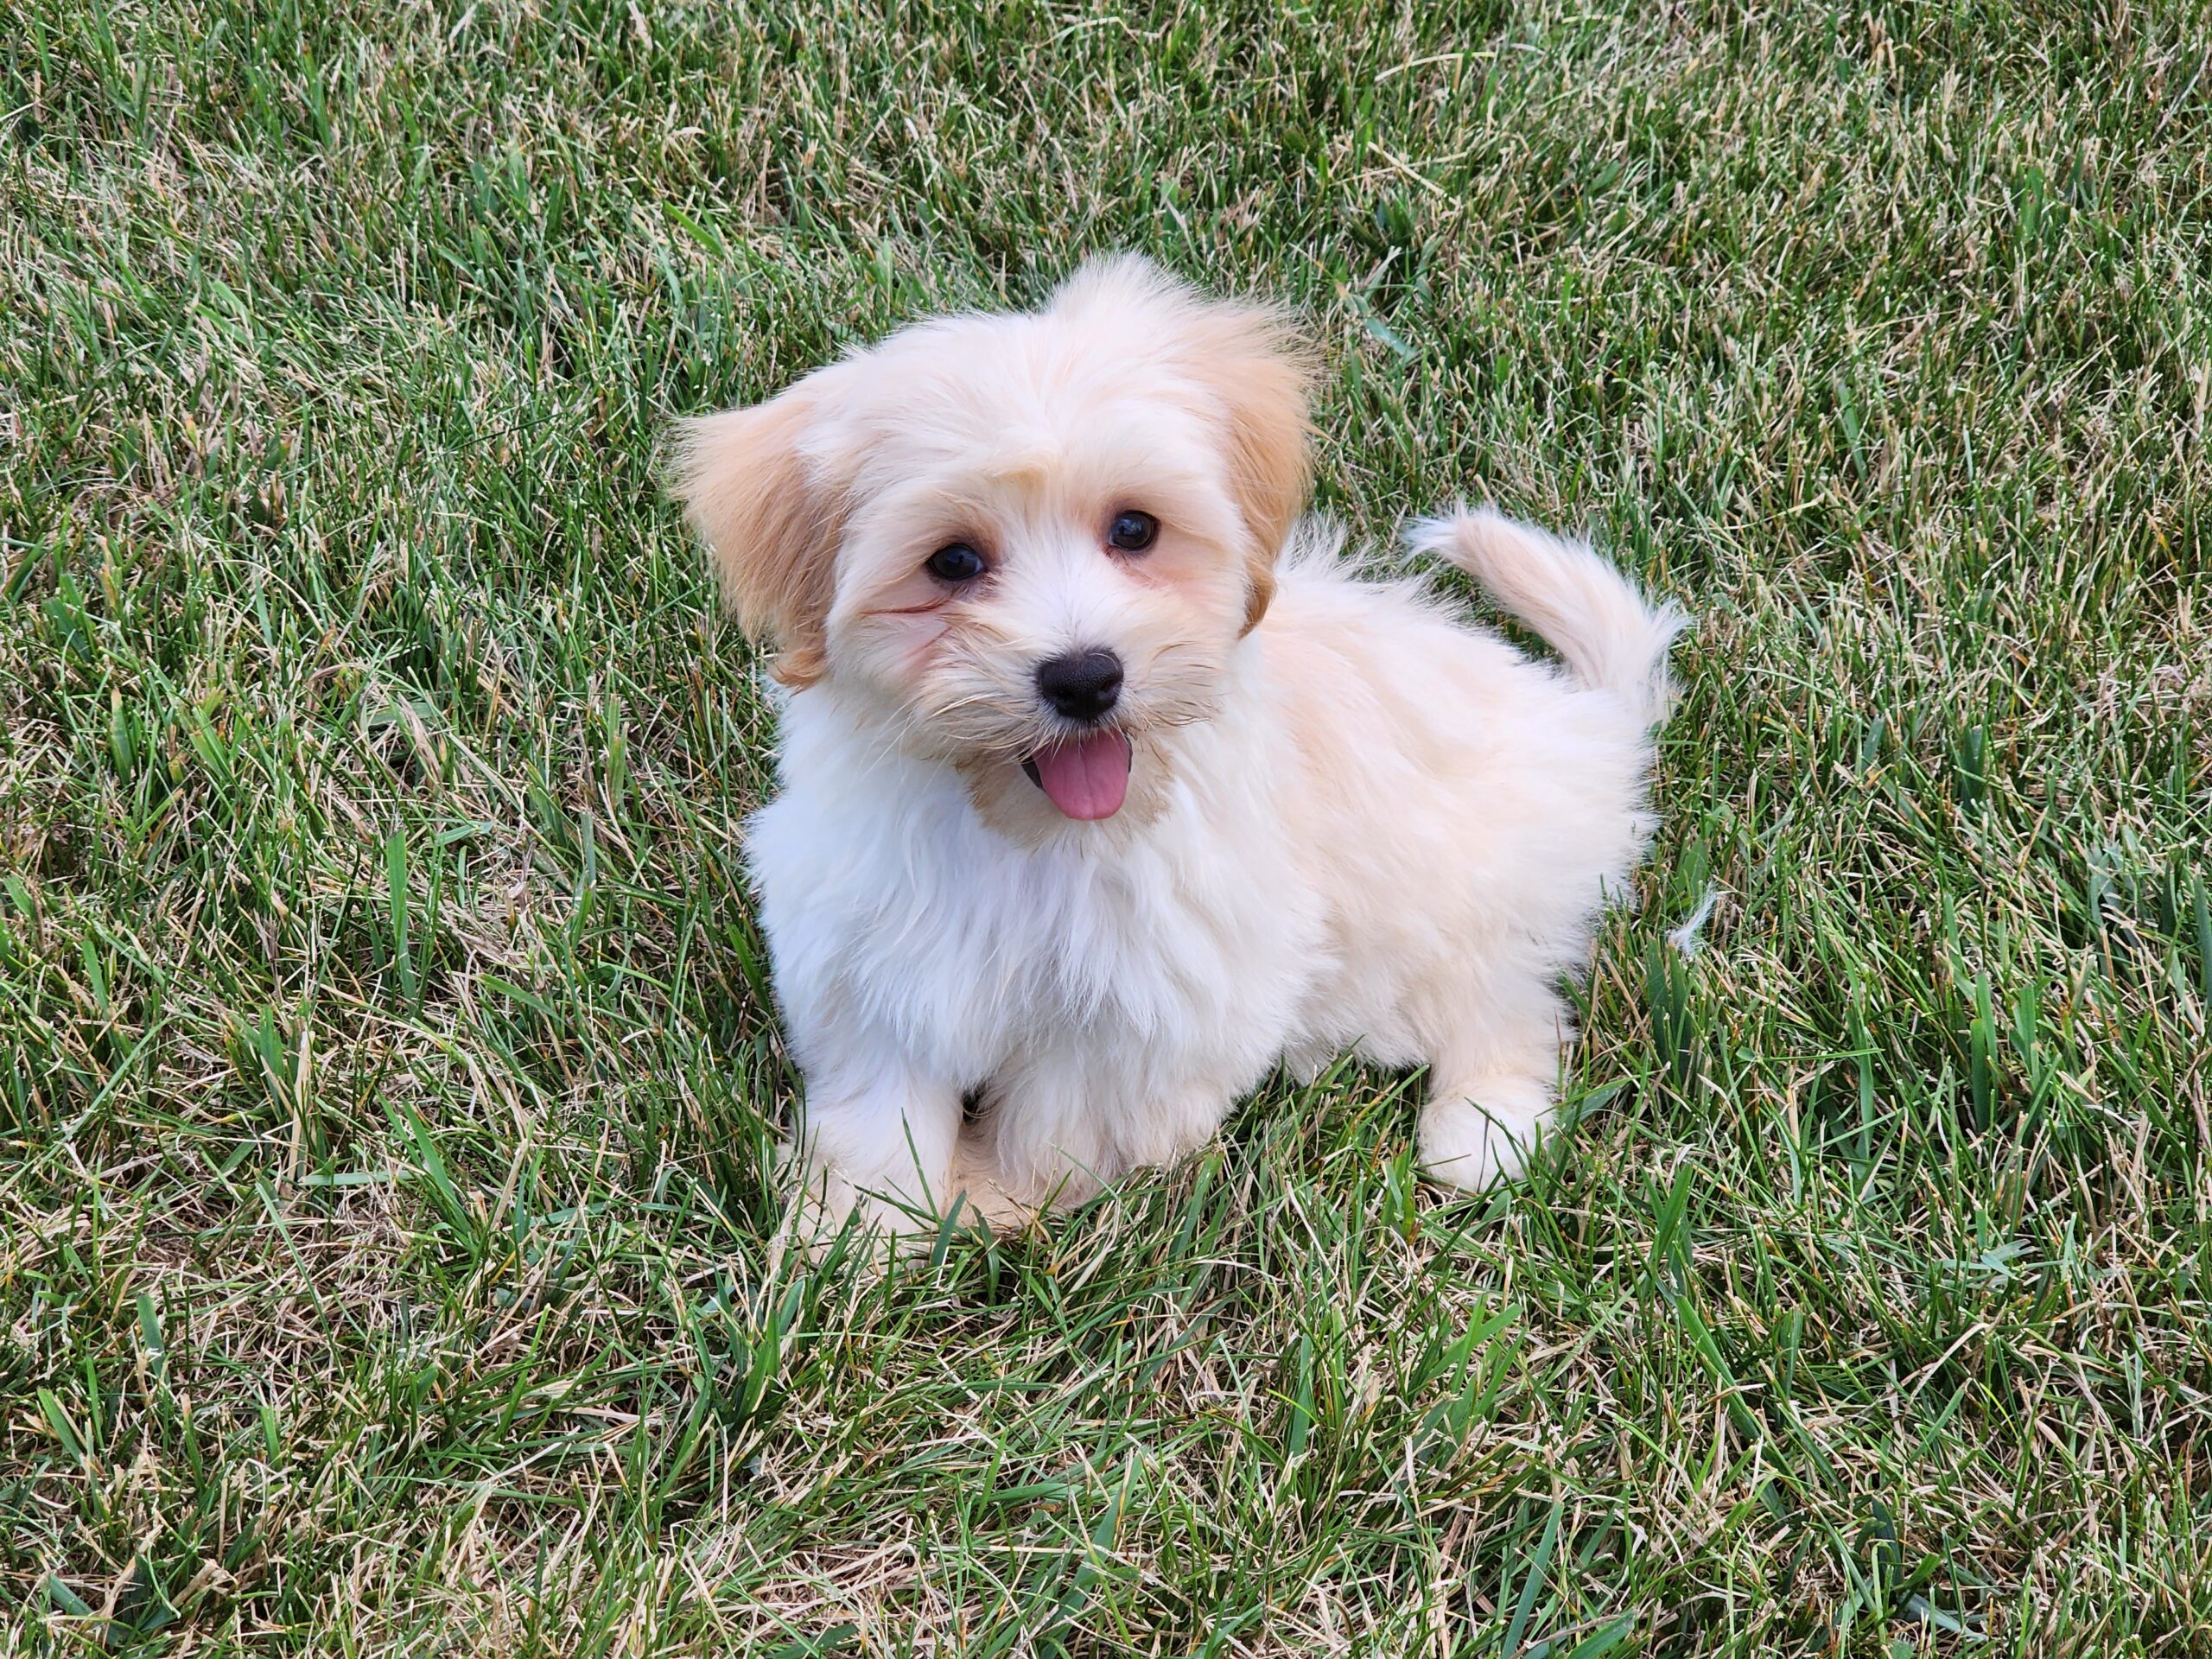 "Jack" DOB: 5/6/23. Breed: Havanese. Sex: Male. Available July 6th. Price: $1000.